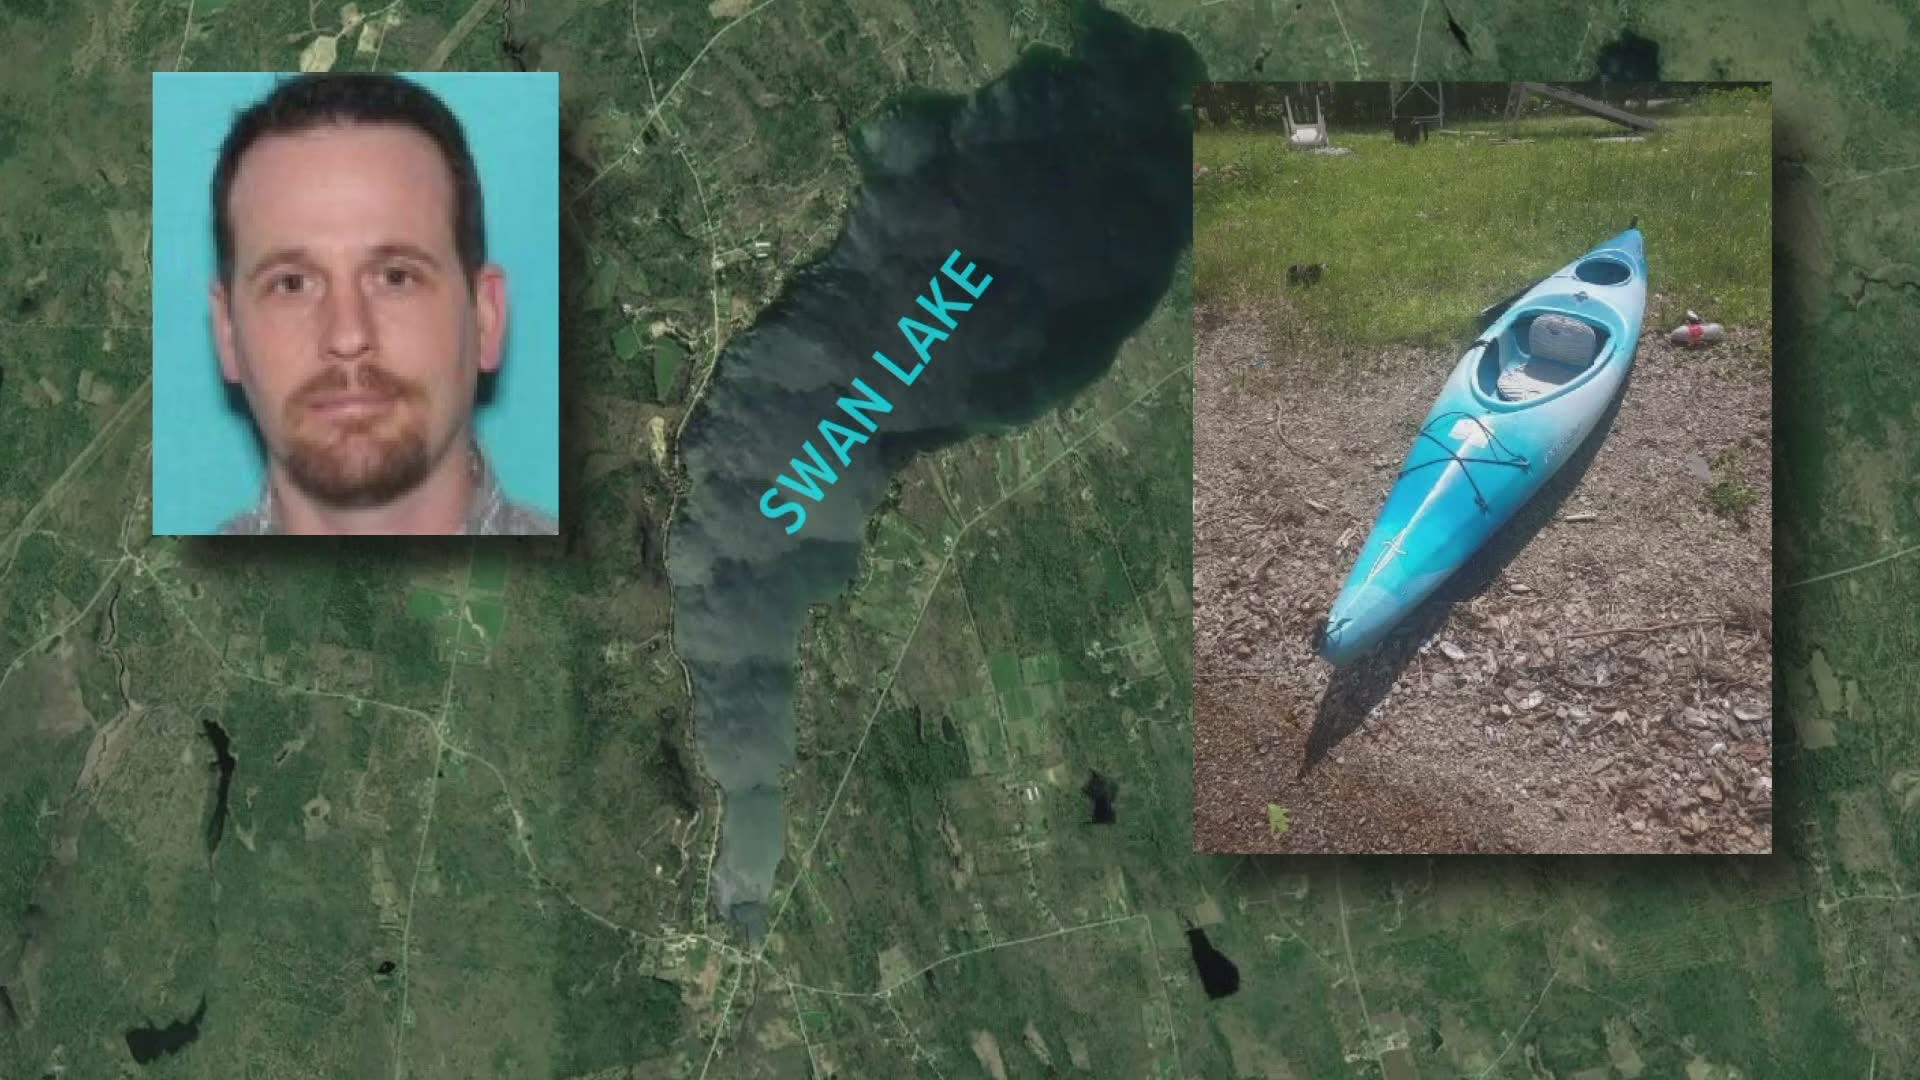 A 41-year-old Oregon man was reported missing on Tuesday; his kayak was found floating overturned on Swan Lake